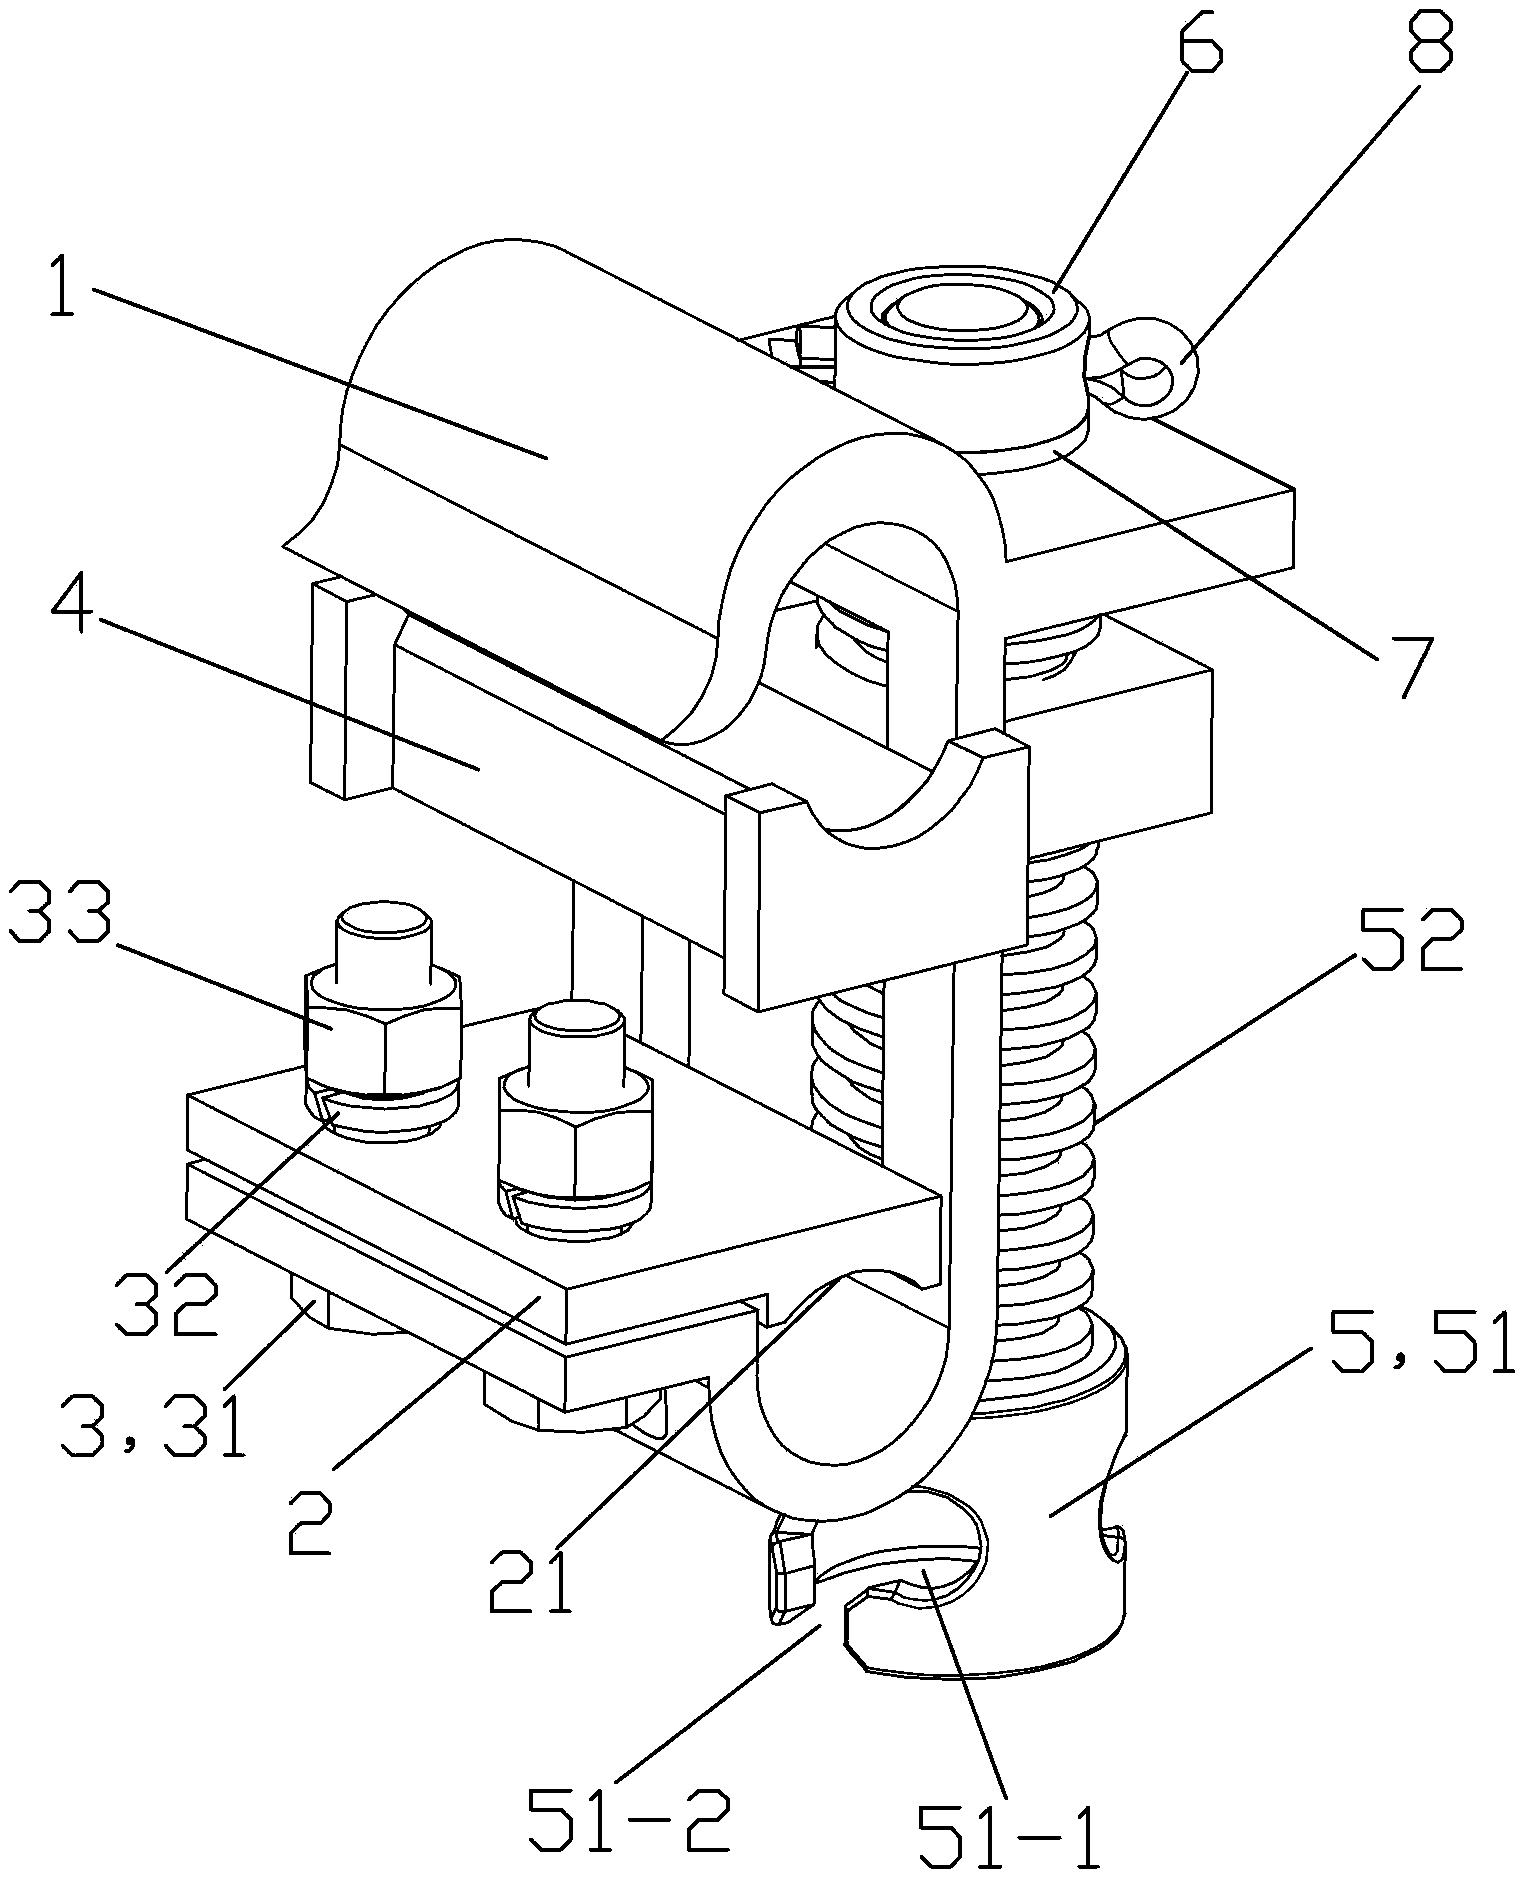 Ground potential operation non-bearing connection wire clamp